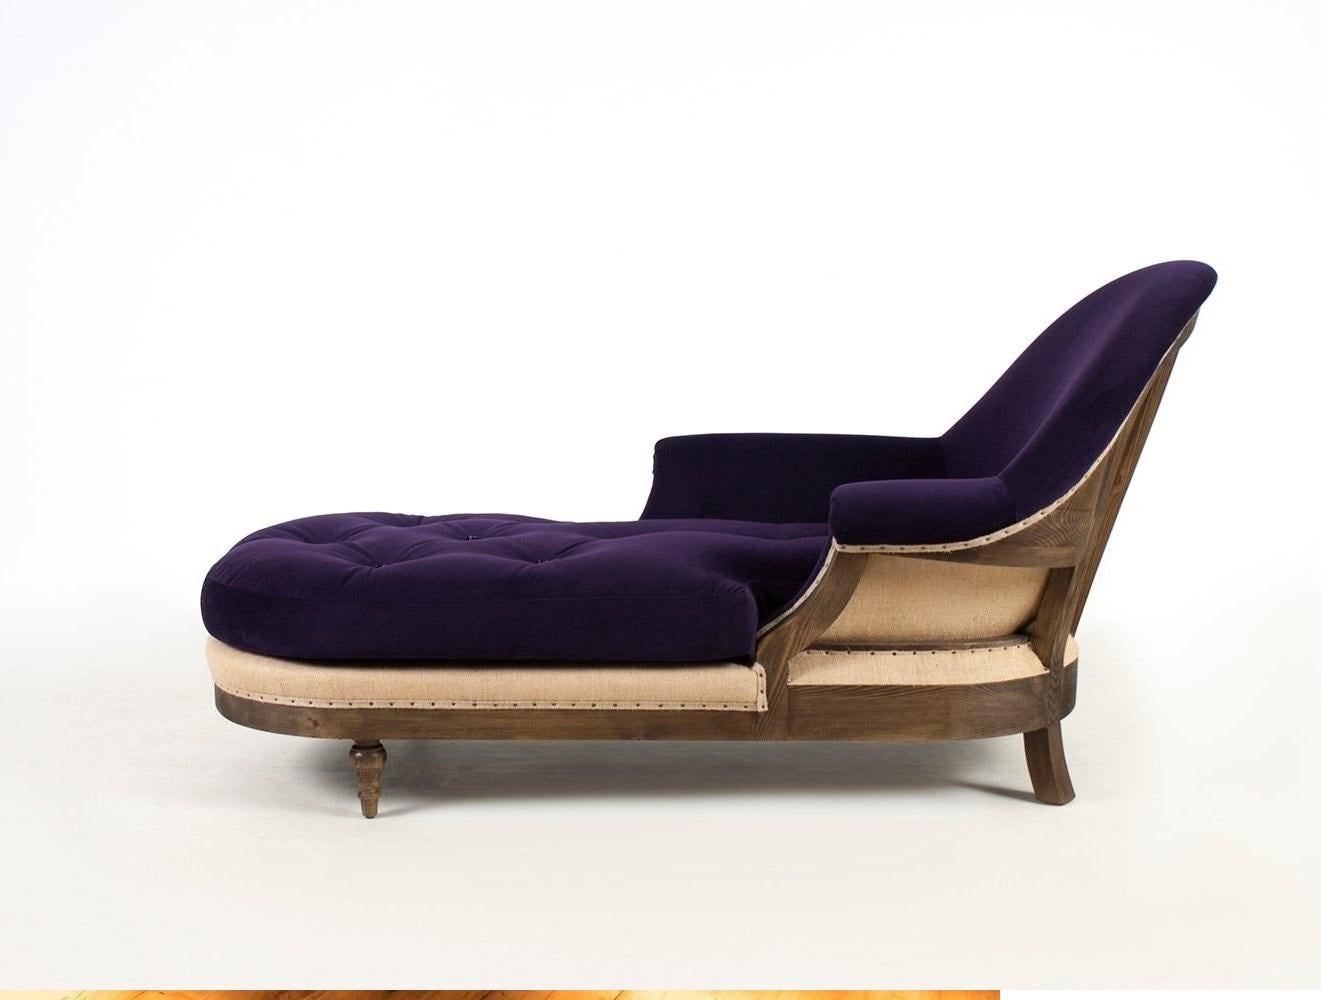 Luxury comfort with soft, airy and refined elegance. This chaise longue showcases rustic elegance at its finest. The high-quality handmade work gives comfort and elegance to your personal moments.
Dimensions: W 31.5